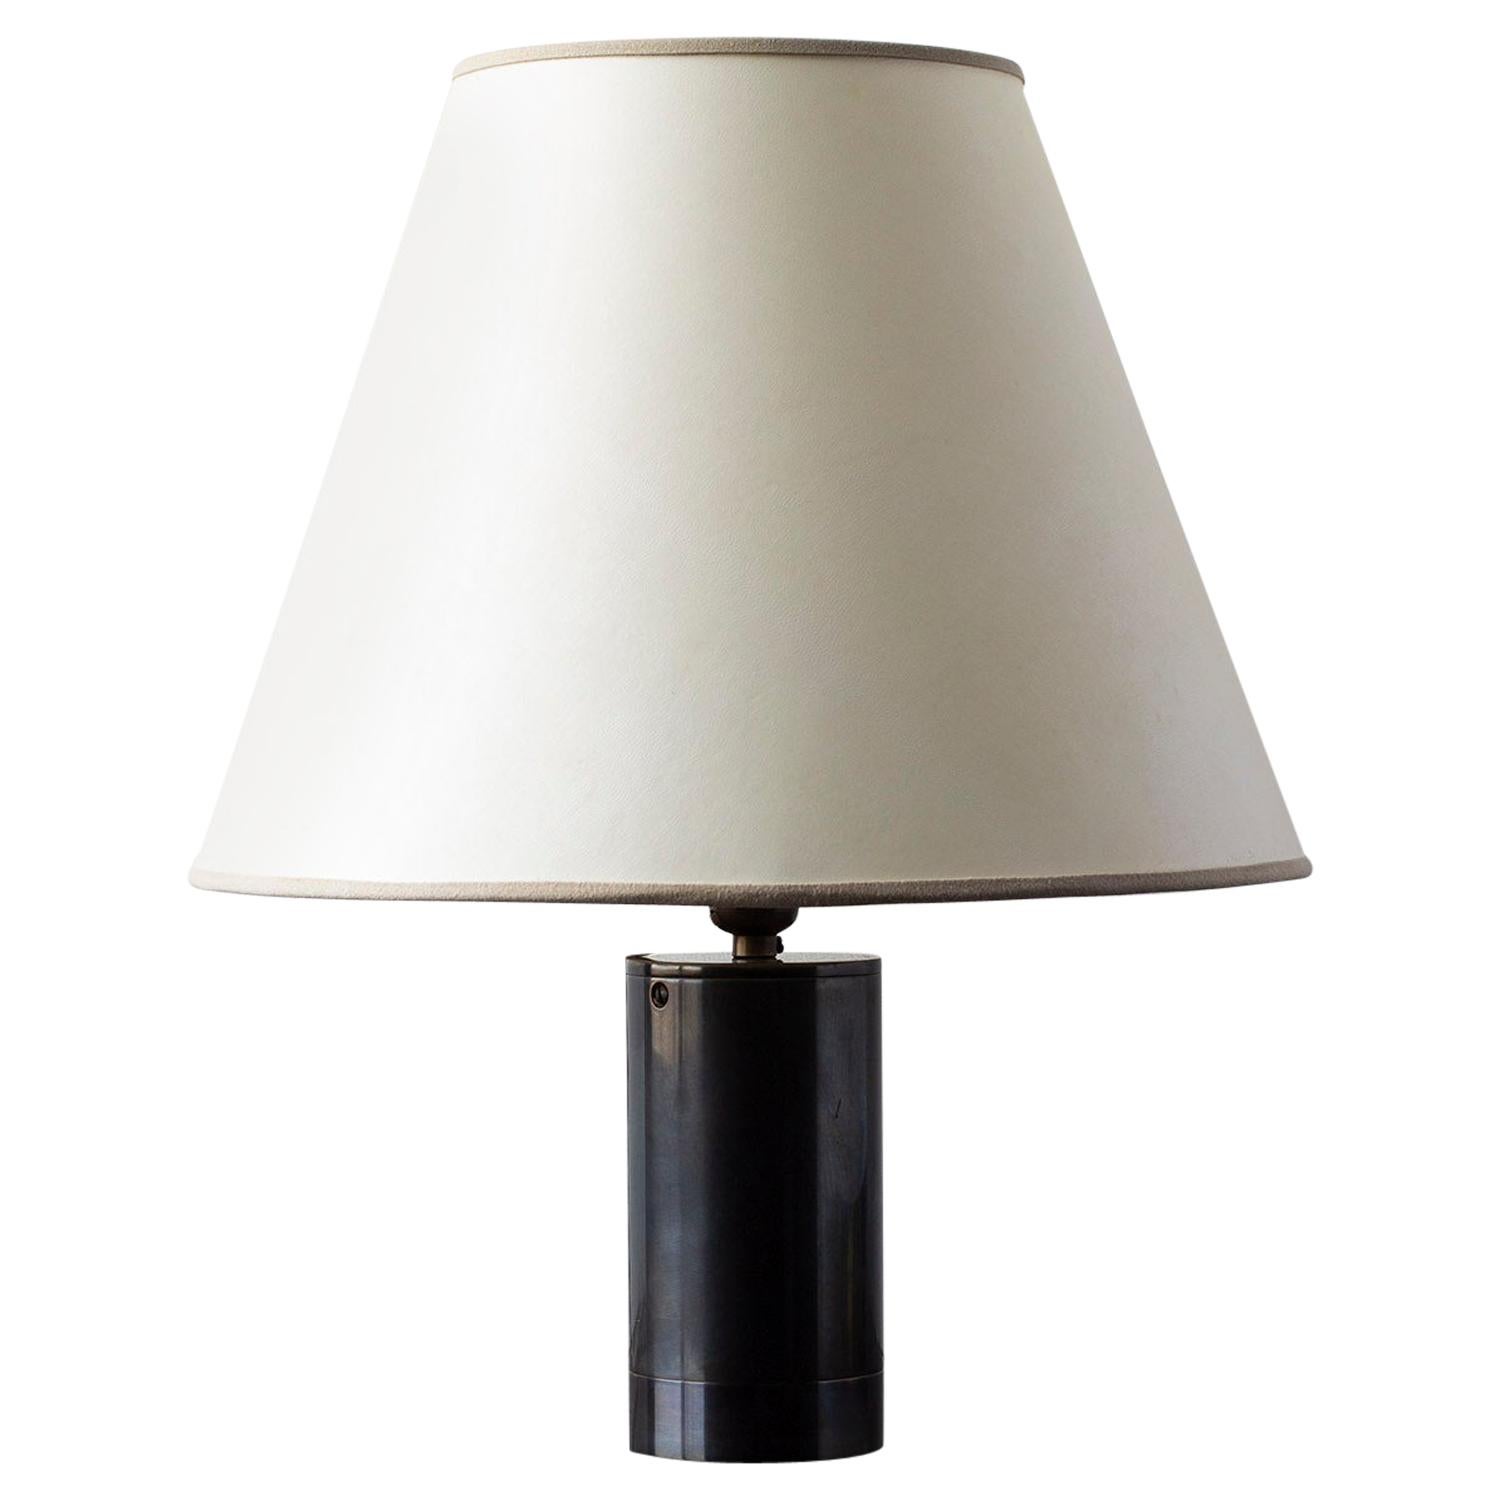 Series02 Table Lamp, Dark Patinated Brass, Goatskin Parchment Ultra Suede Trim